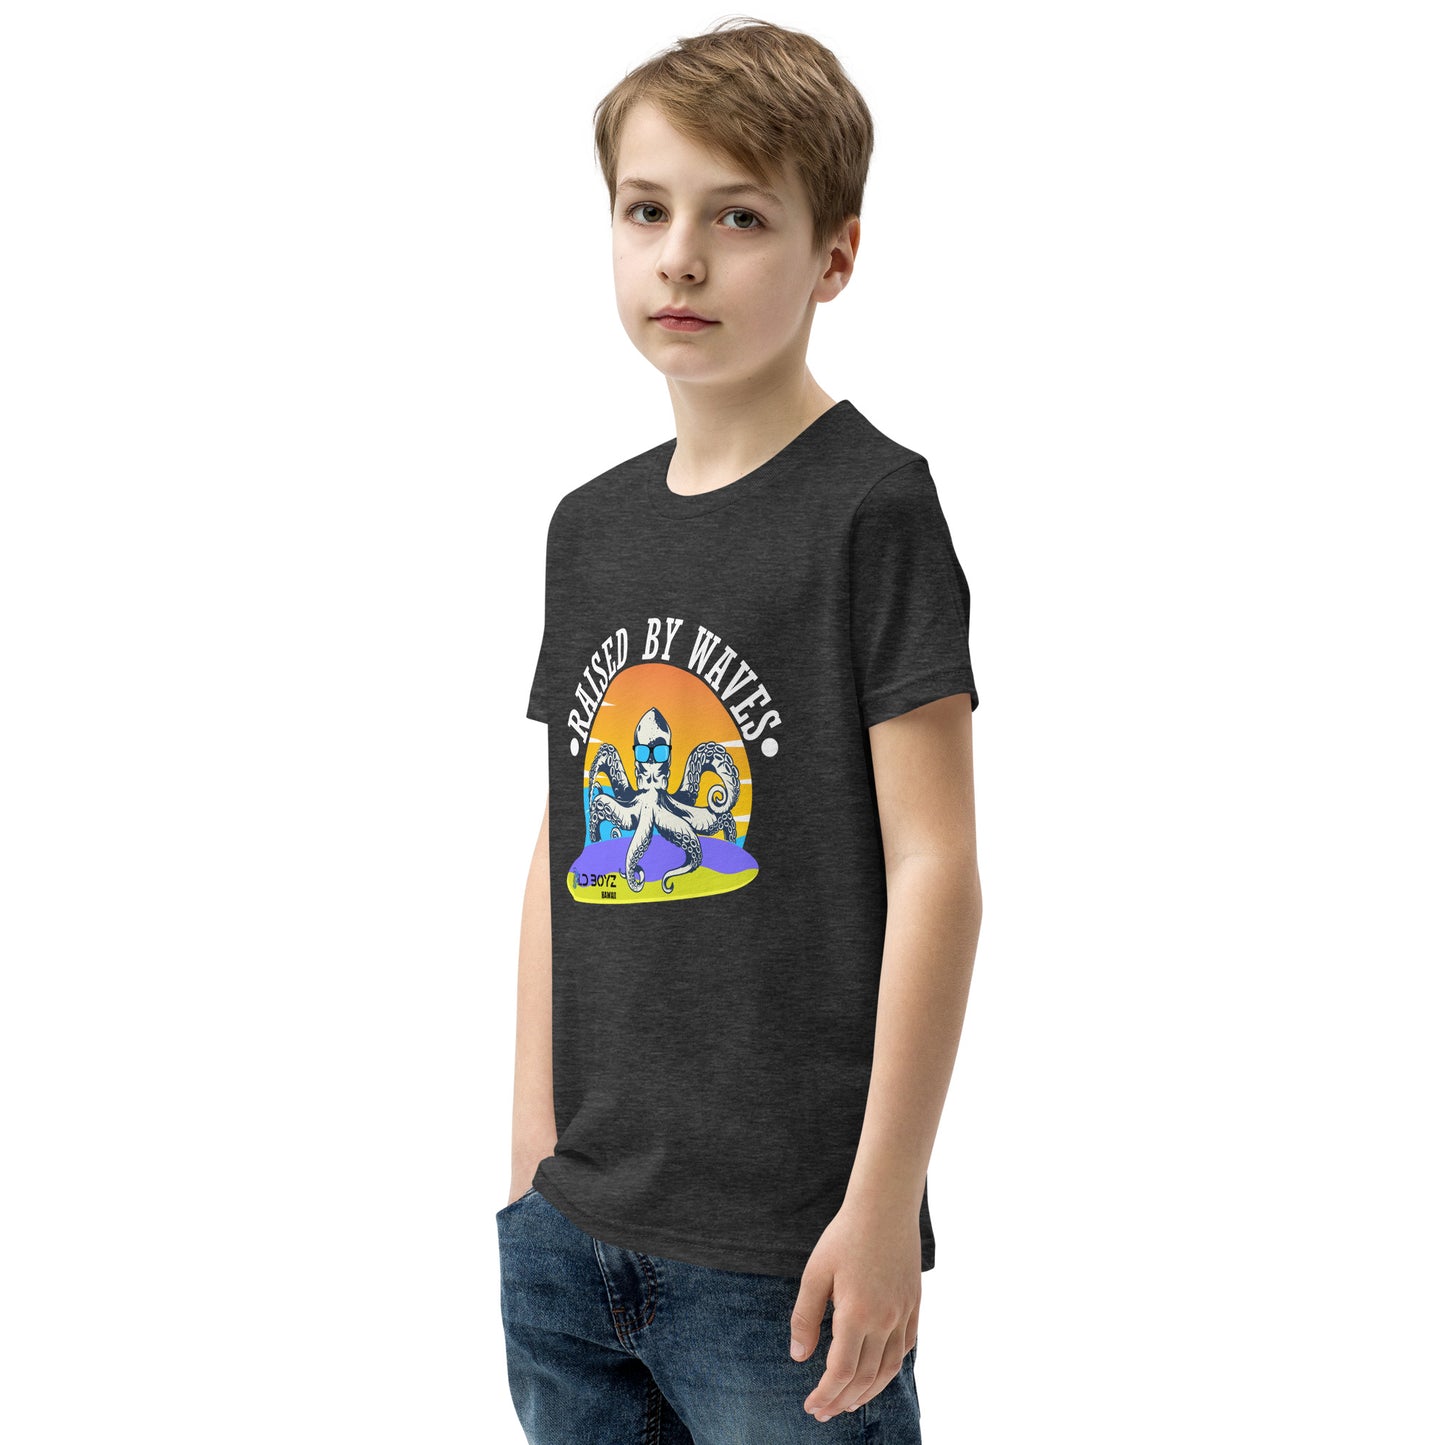 Raised By Waves Youth Short Sleeve T-Shirt